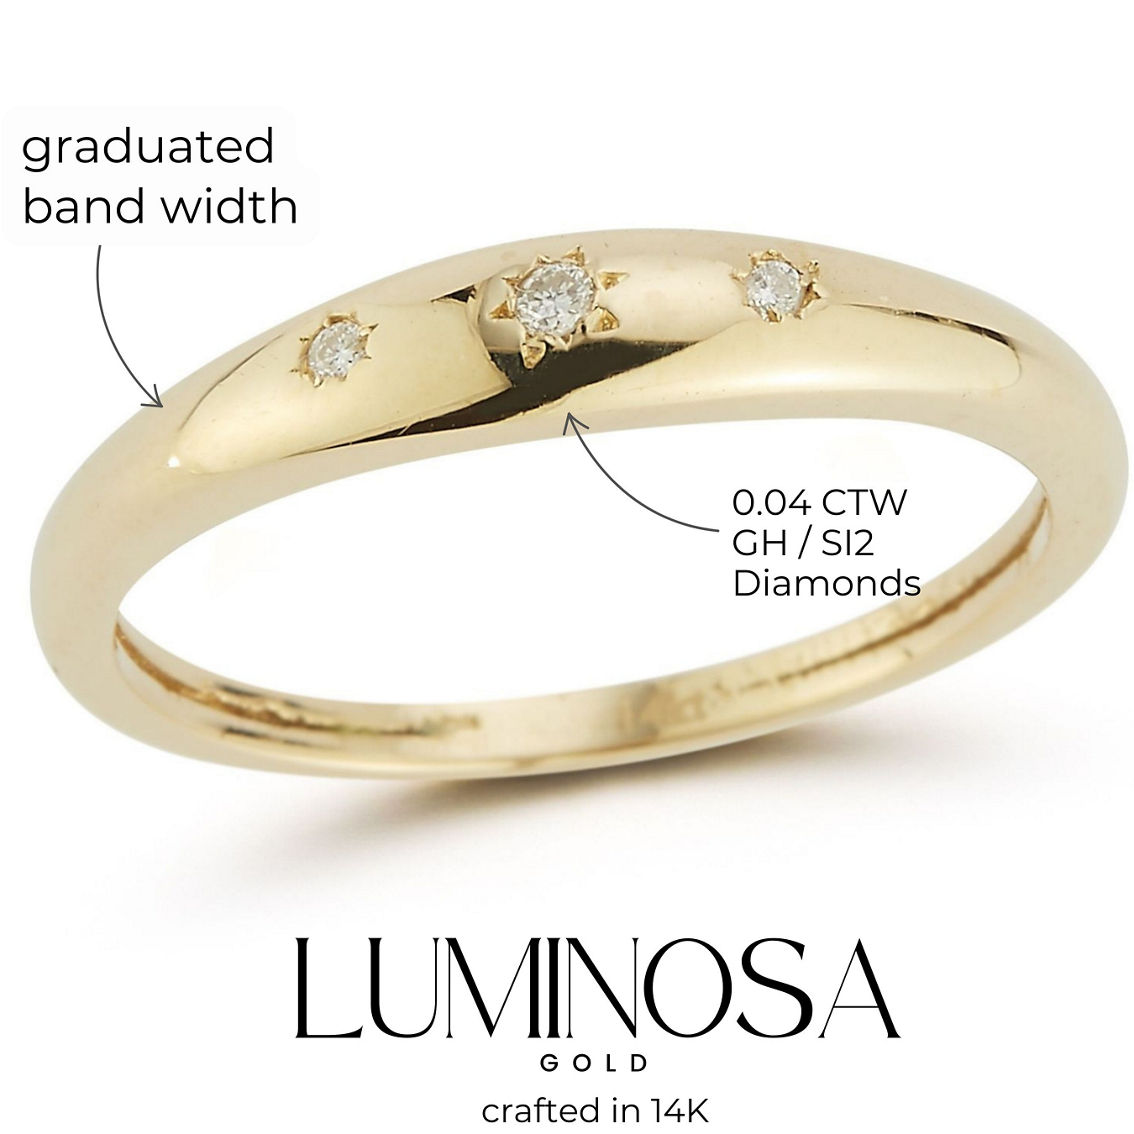 Luminosa Gold 14K Gold and Diamond Accent Dome Ring - Image 3 of 5